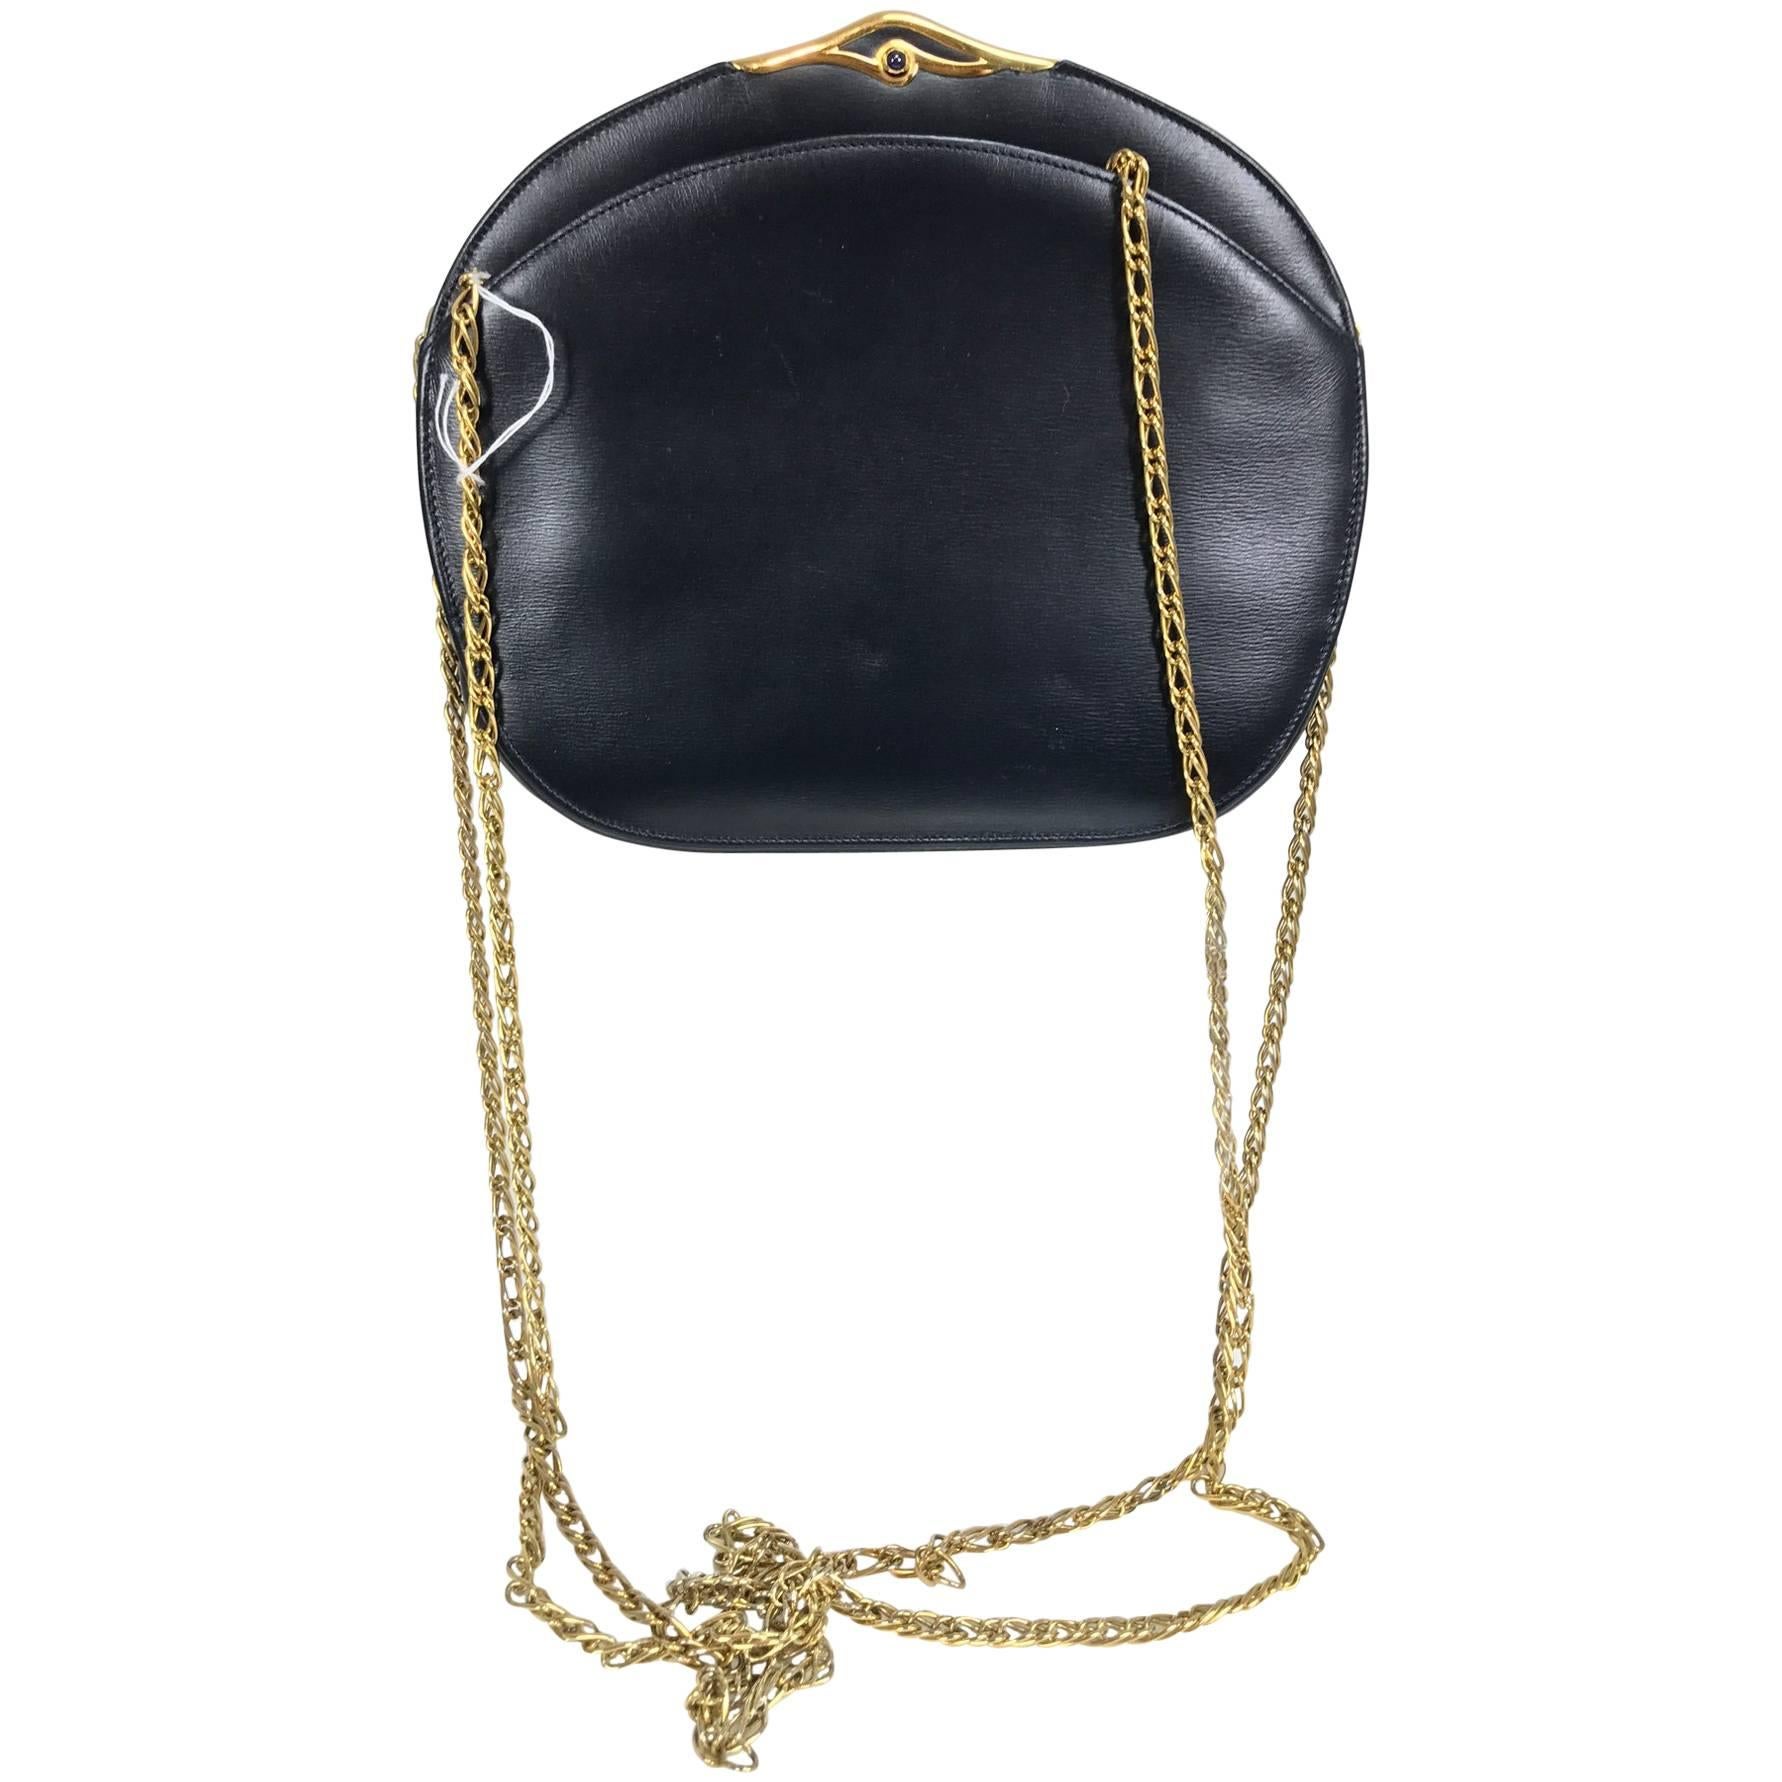 Cartier Black box calf clutch or gold chain shoulder bag gold clasp with stone